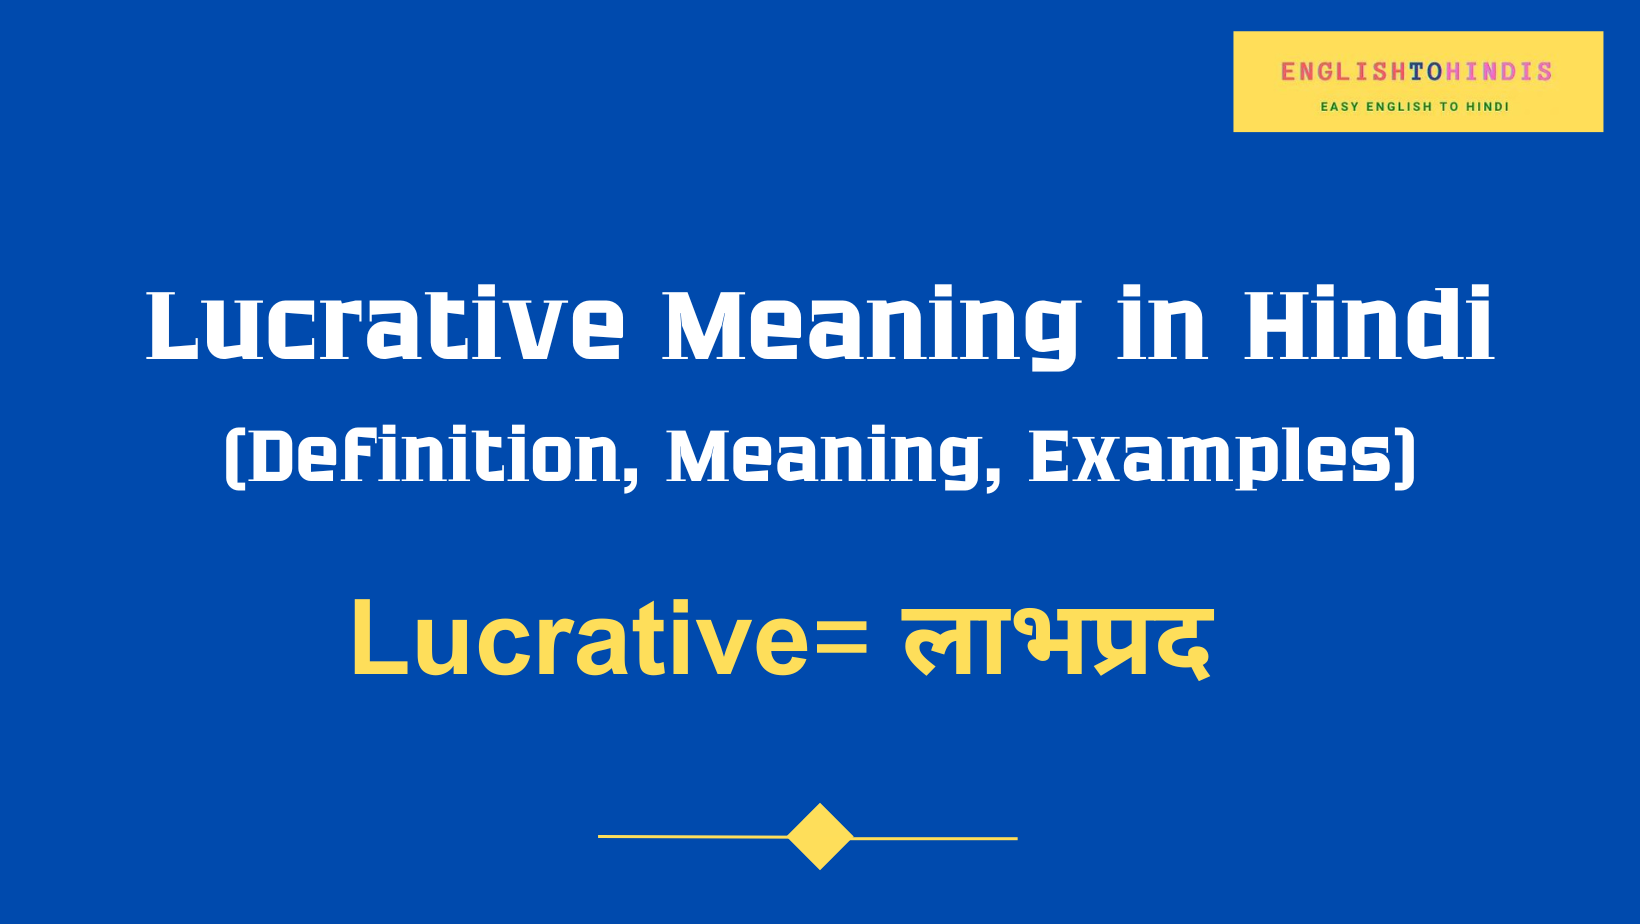 Lucrative meaning in Hindi